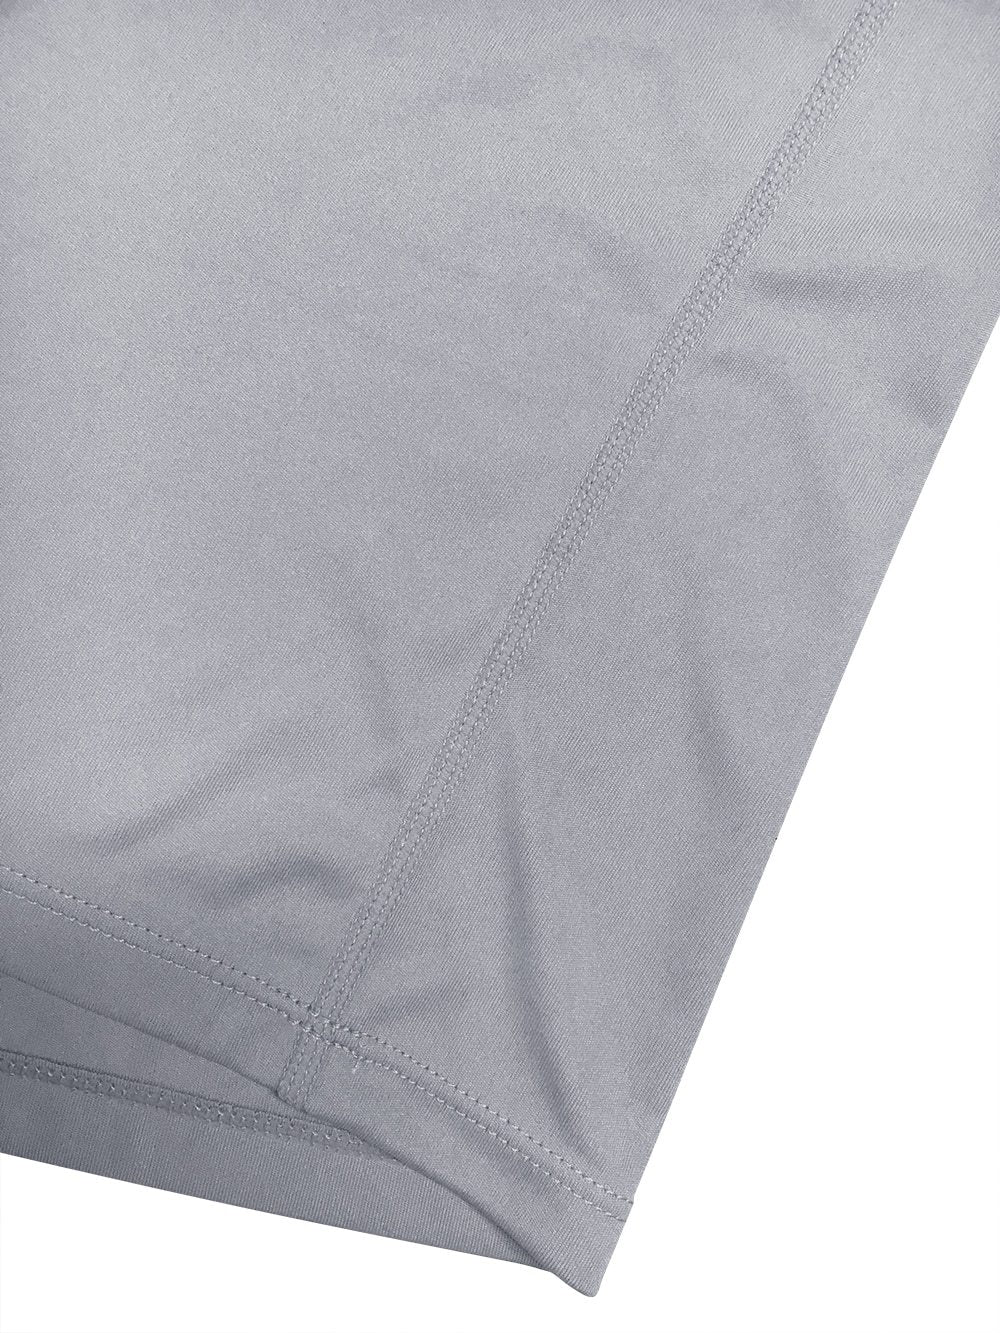 Showcasing the lightweight and quick drying fabric.